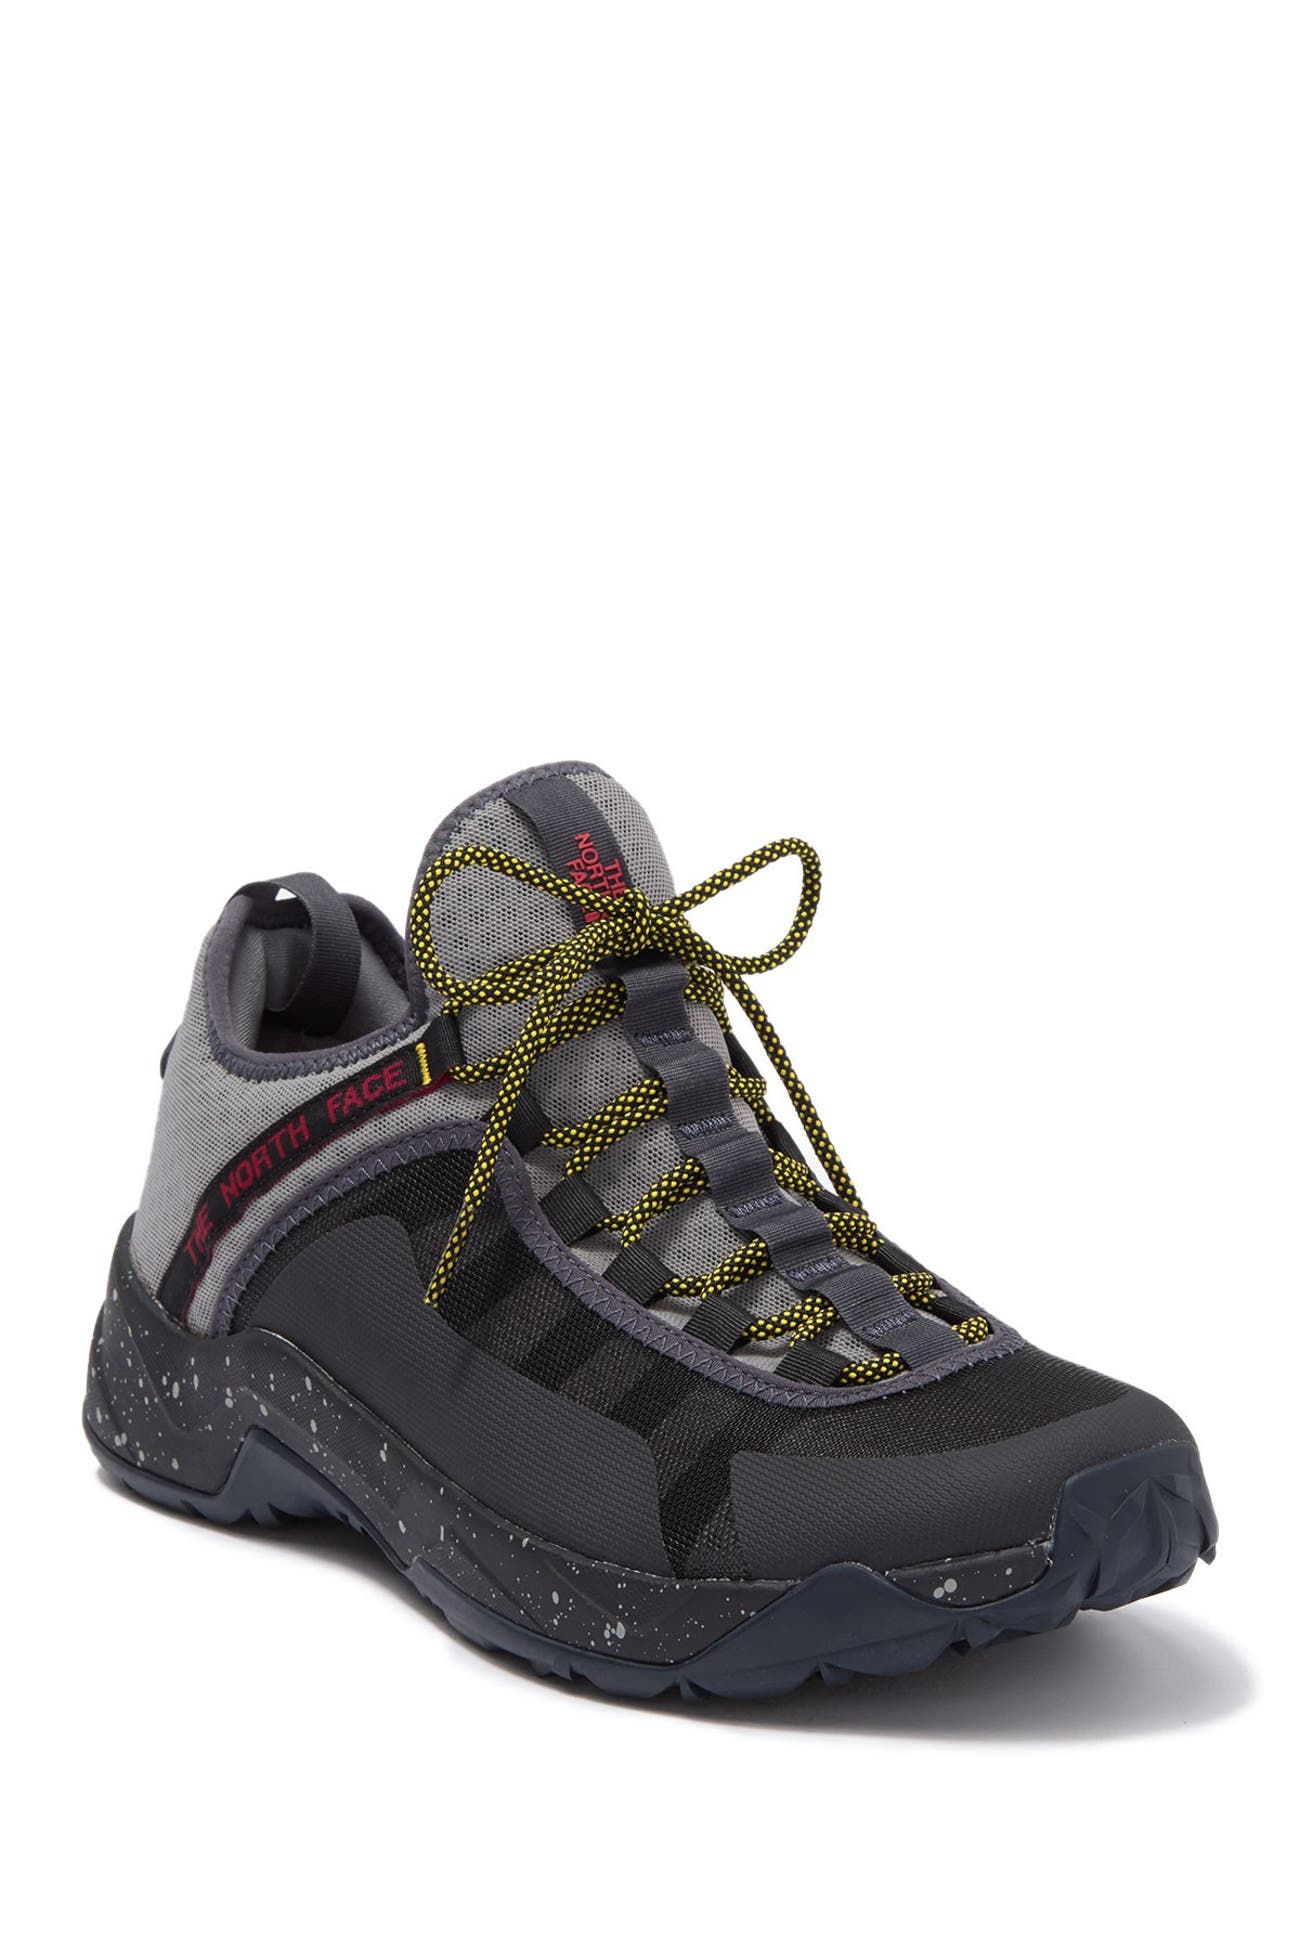 The North Face | Trail Escape Peak Hiking Sneaker | Nordstrom Rack